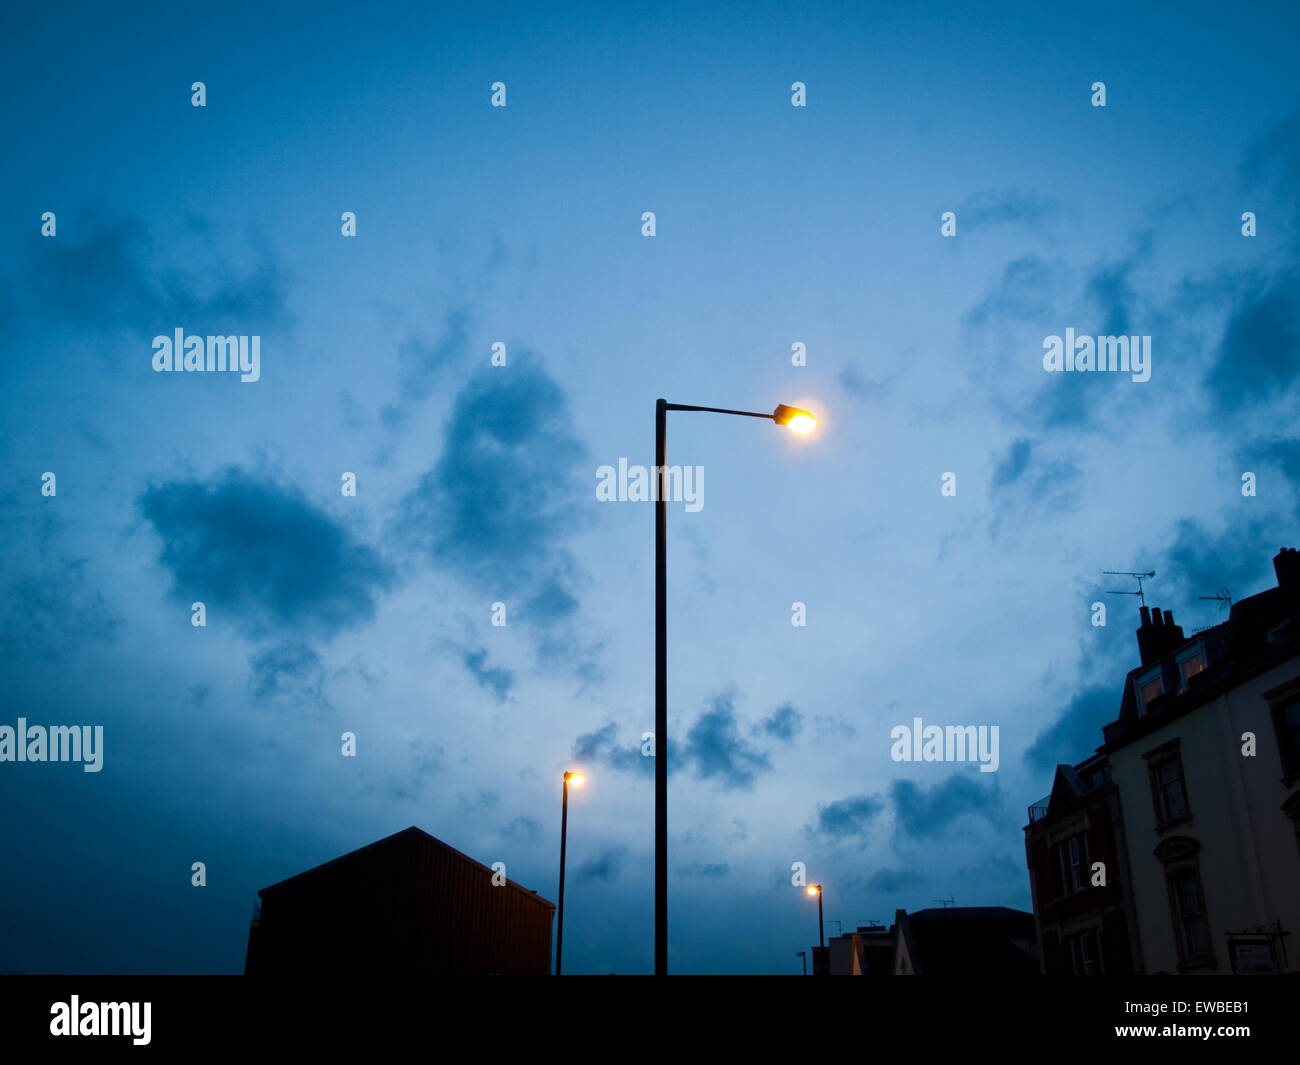 Streetlights at night in built-up suburban area of town Stock Photo